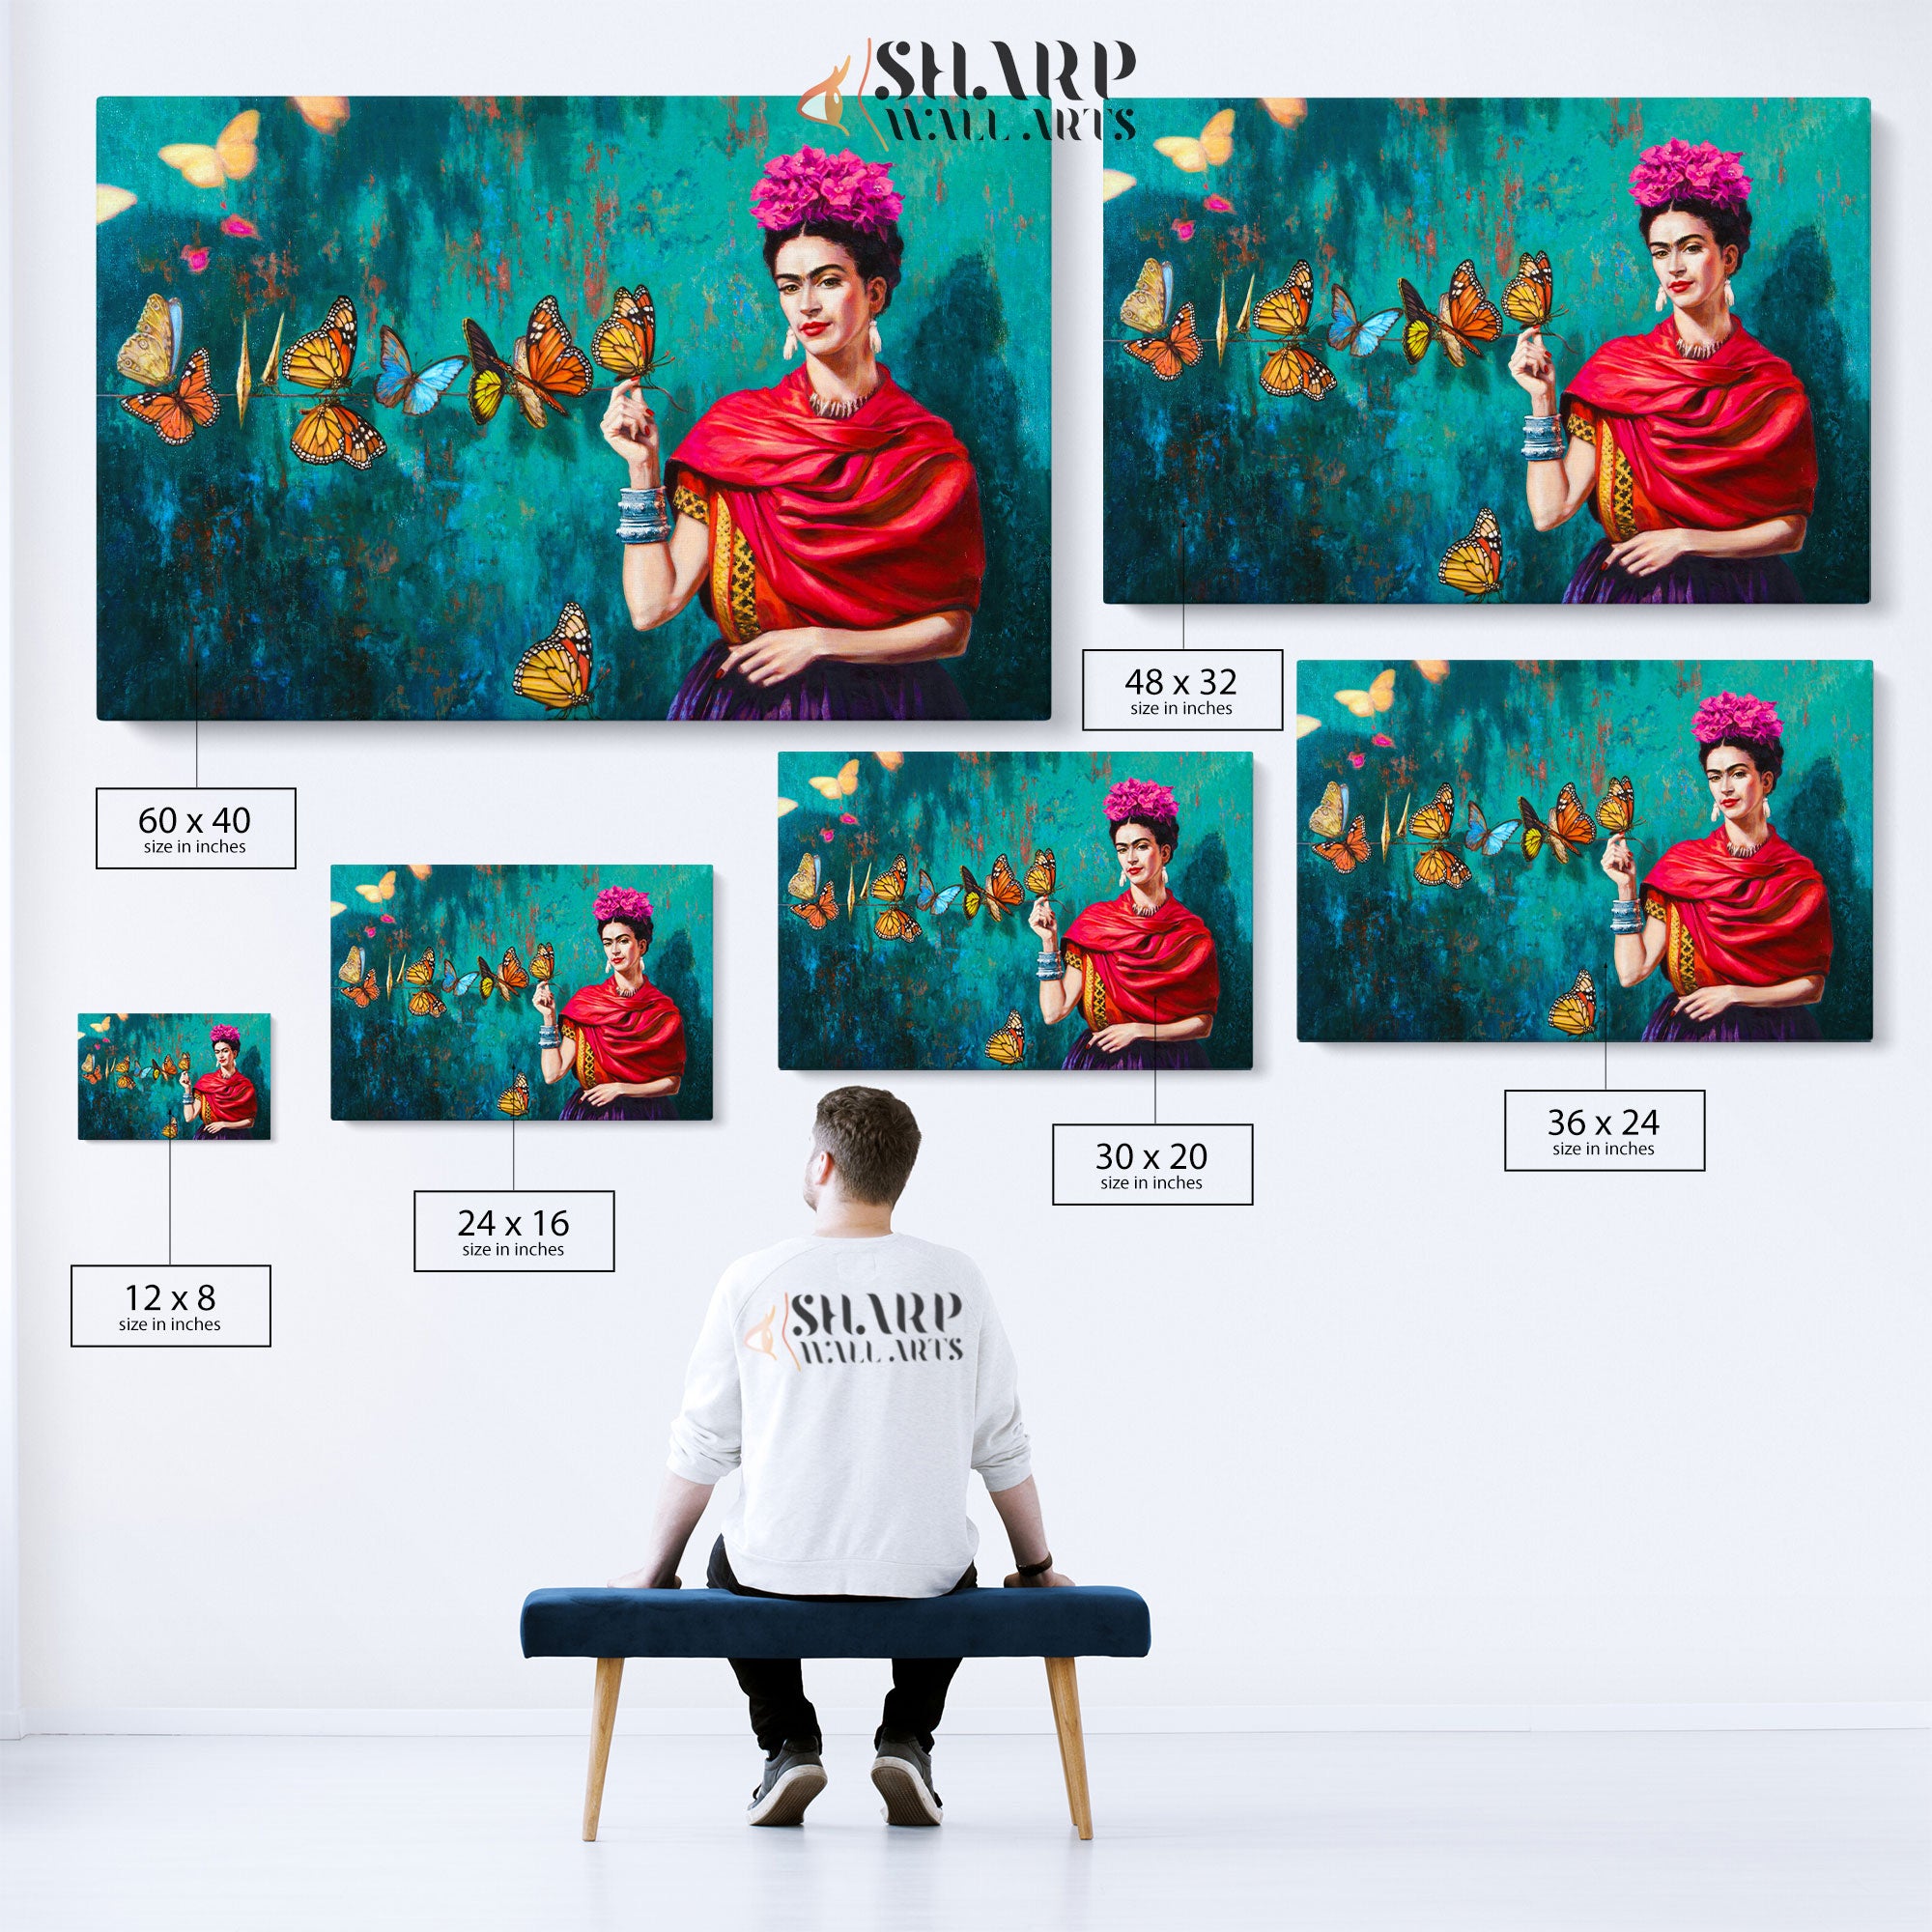 Frida Kahlo And Butterfly Canvas Wall Art